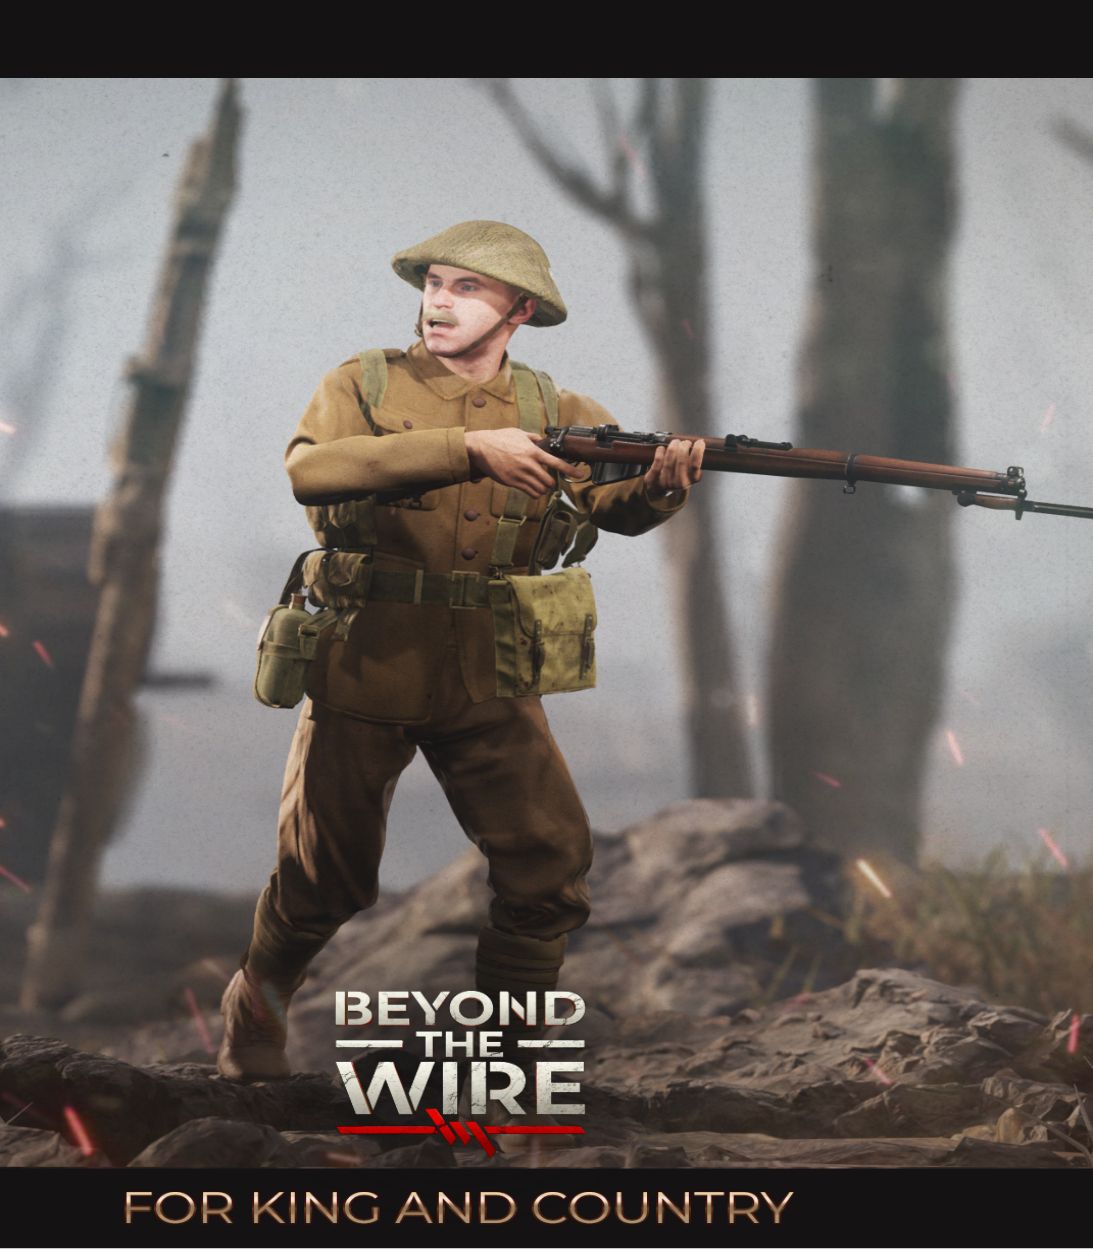 Beyond the Wire British Expeditionary member runs through battlefield.